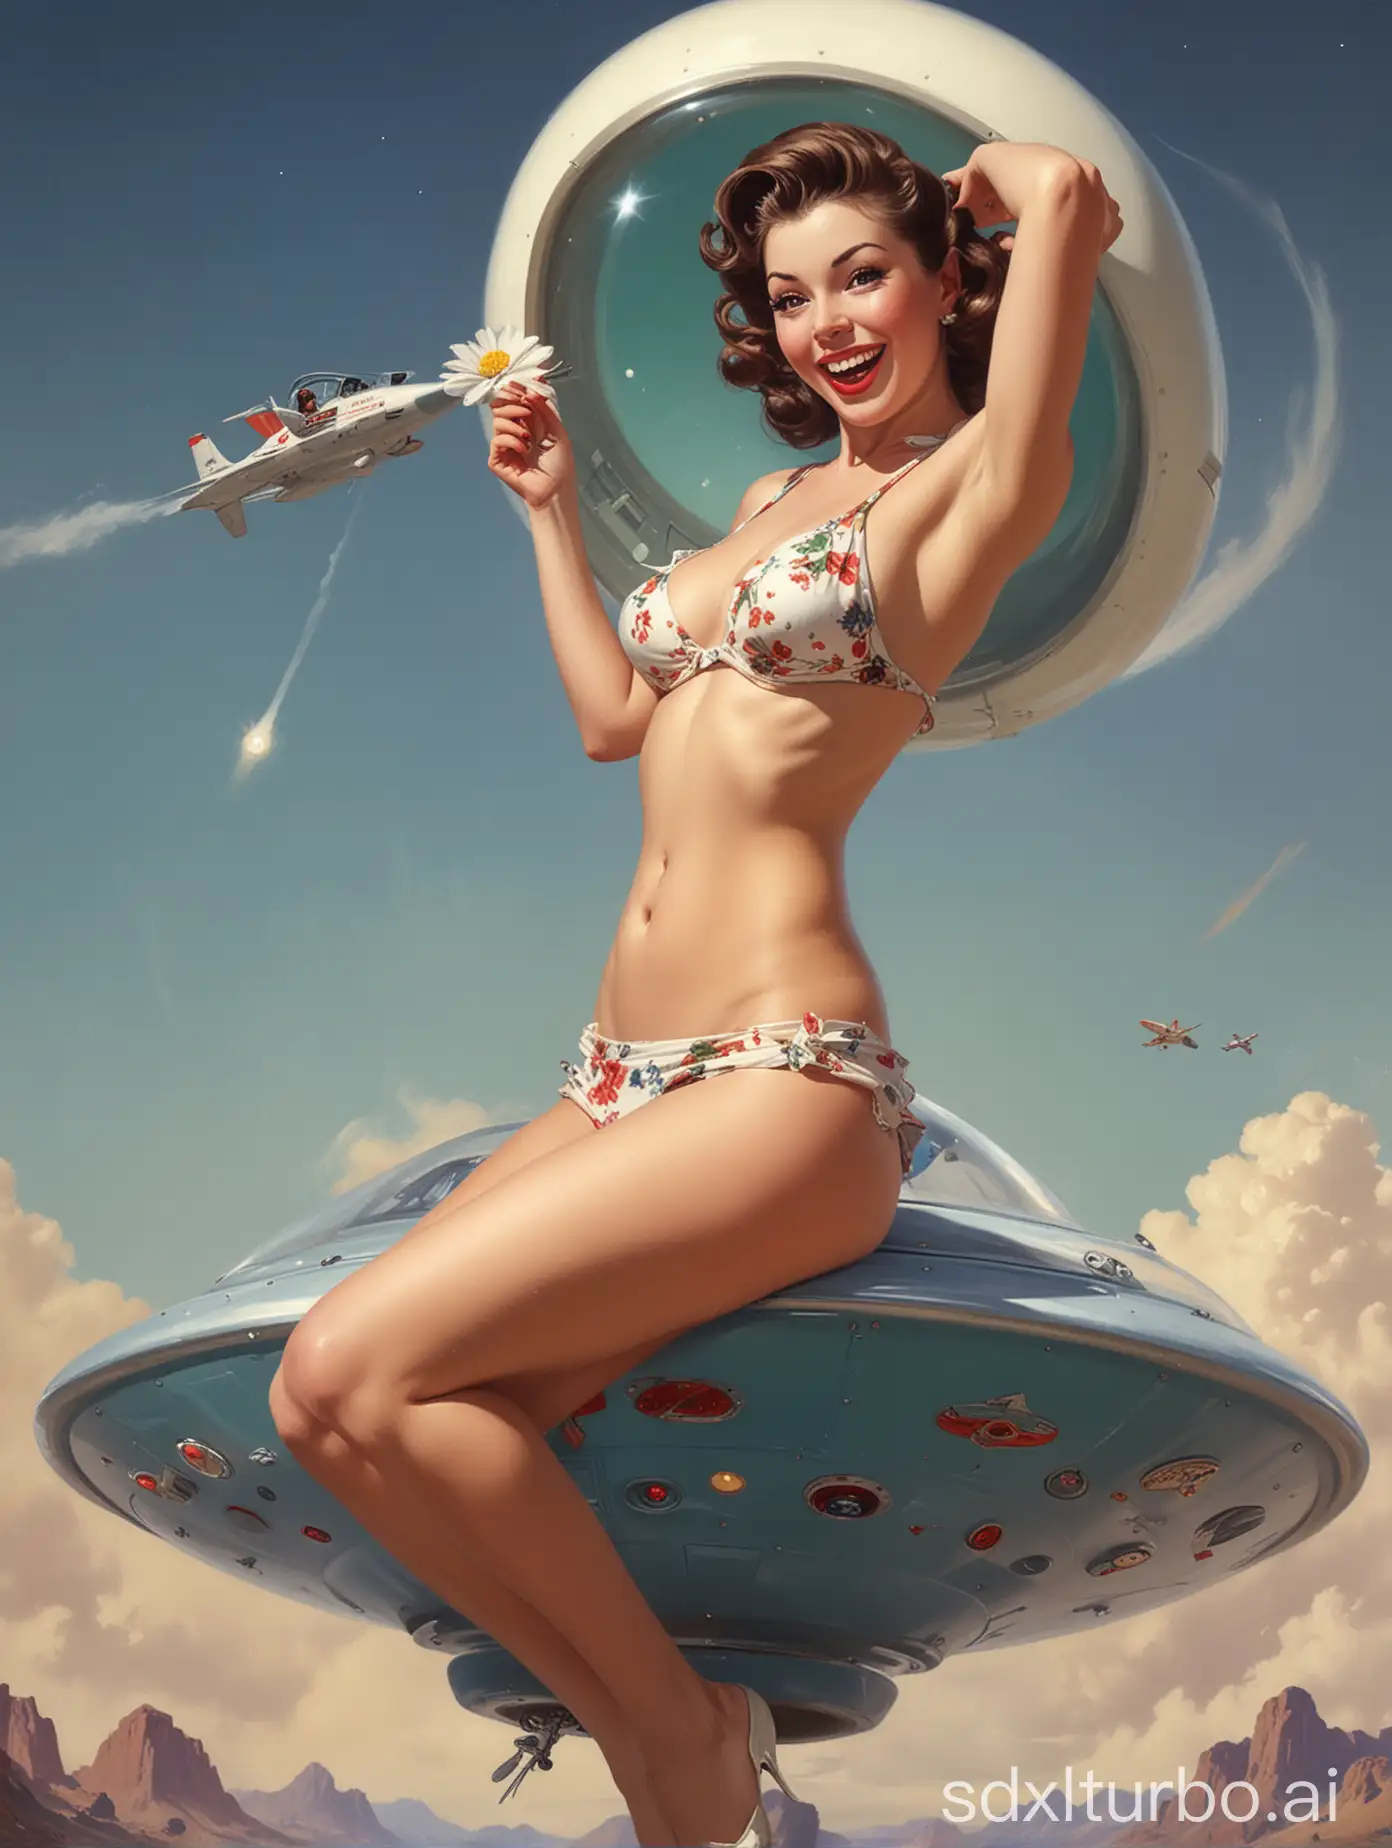 a painting of a woman posing almost naked on a ufo womanizer, surprised and pleased by the feeling, by Art Frahm, by Gil Elvgren, by Alberto Vargas, by Rolf Armstrong, pin-up poster girl, long hair wavy, 2015's haircut, picking up a flower, smiling fashion model face, tiny bikini, mischievous grin, young lady, pinup